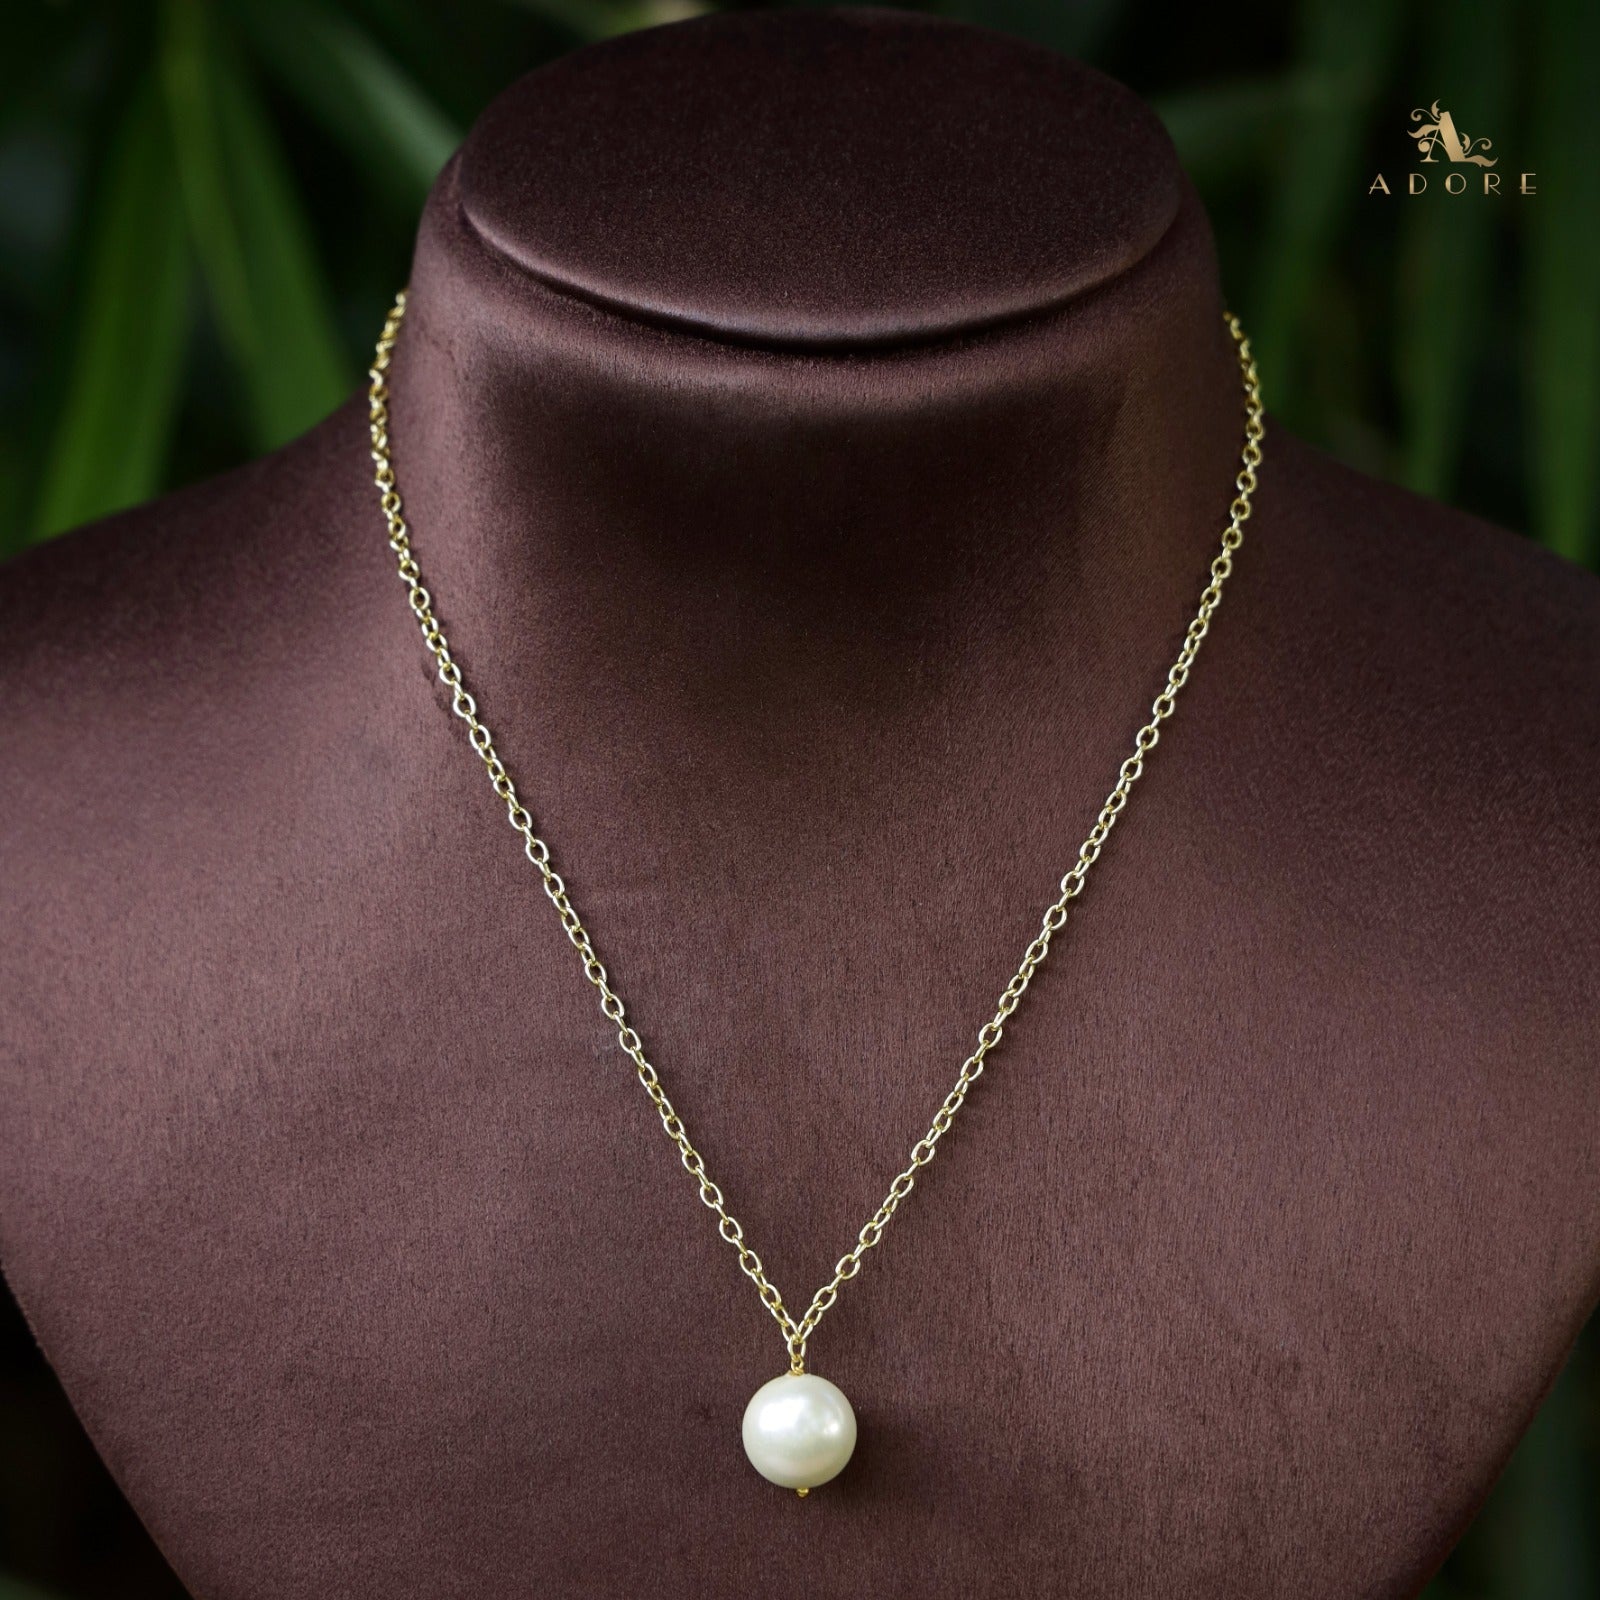 simple | Single pearl necklace, Fashion jewelry, Necklace